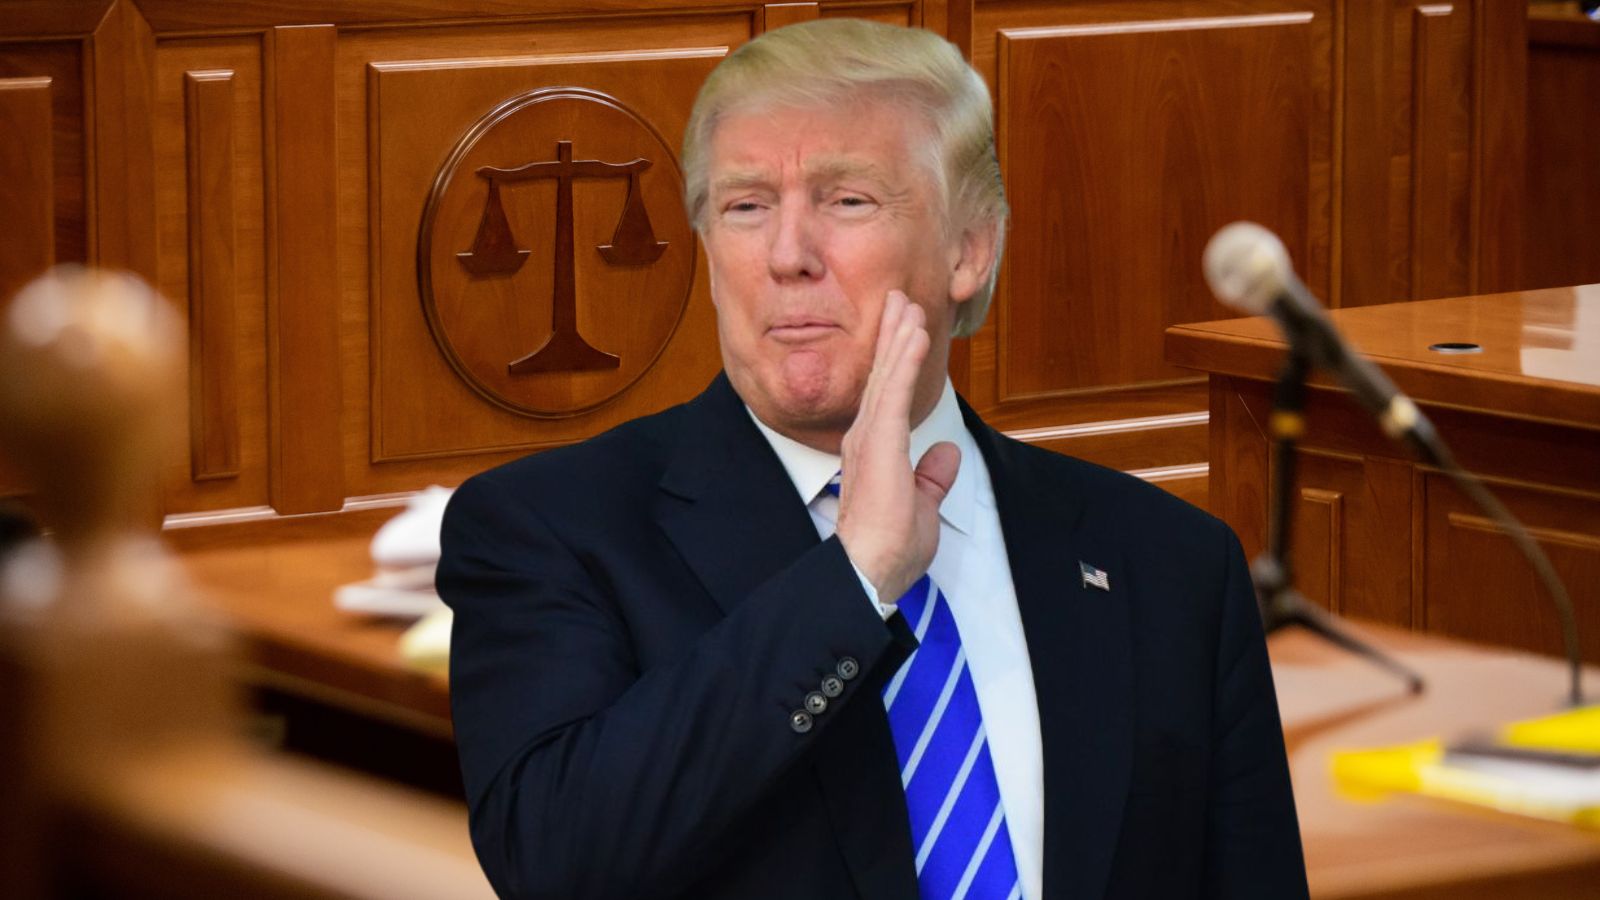 Trump’s Legal Team Claims He “Did Not Directly Threaten” the Judge or Clerk